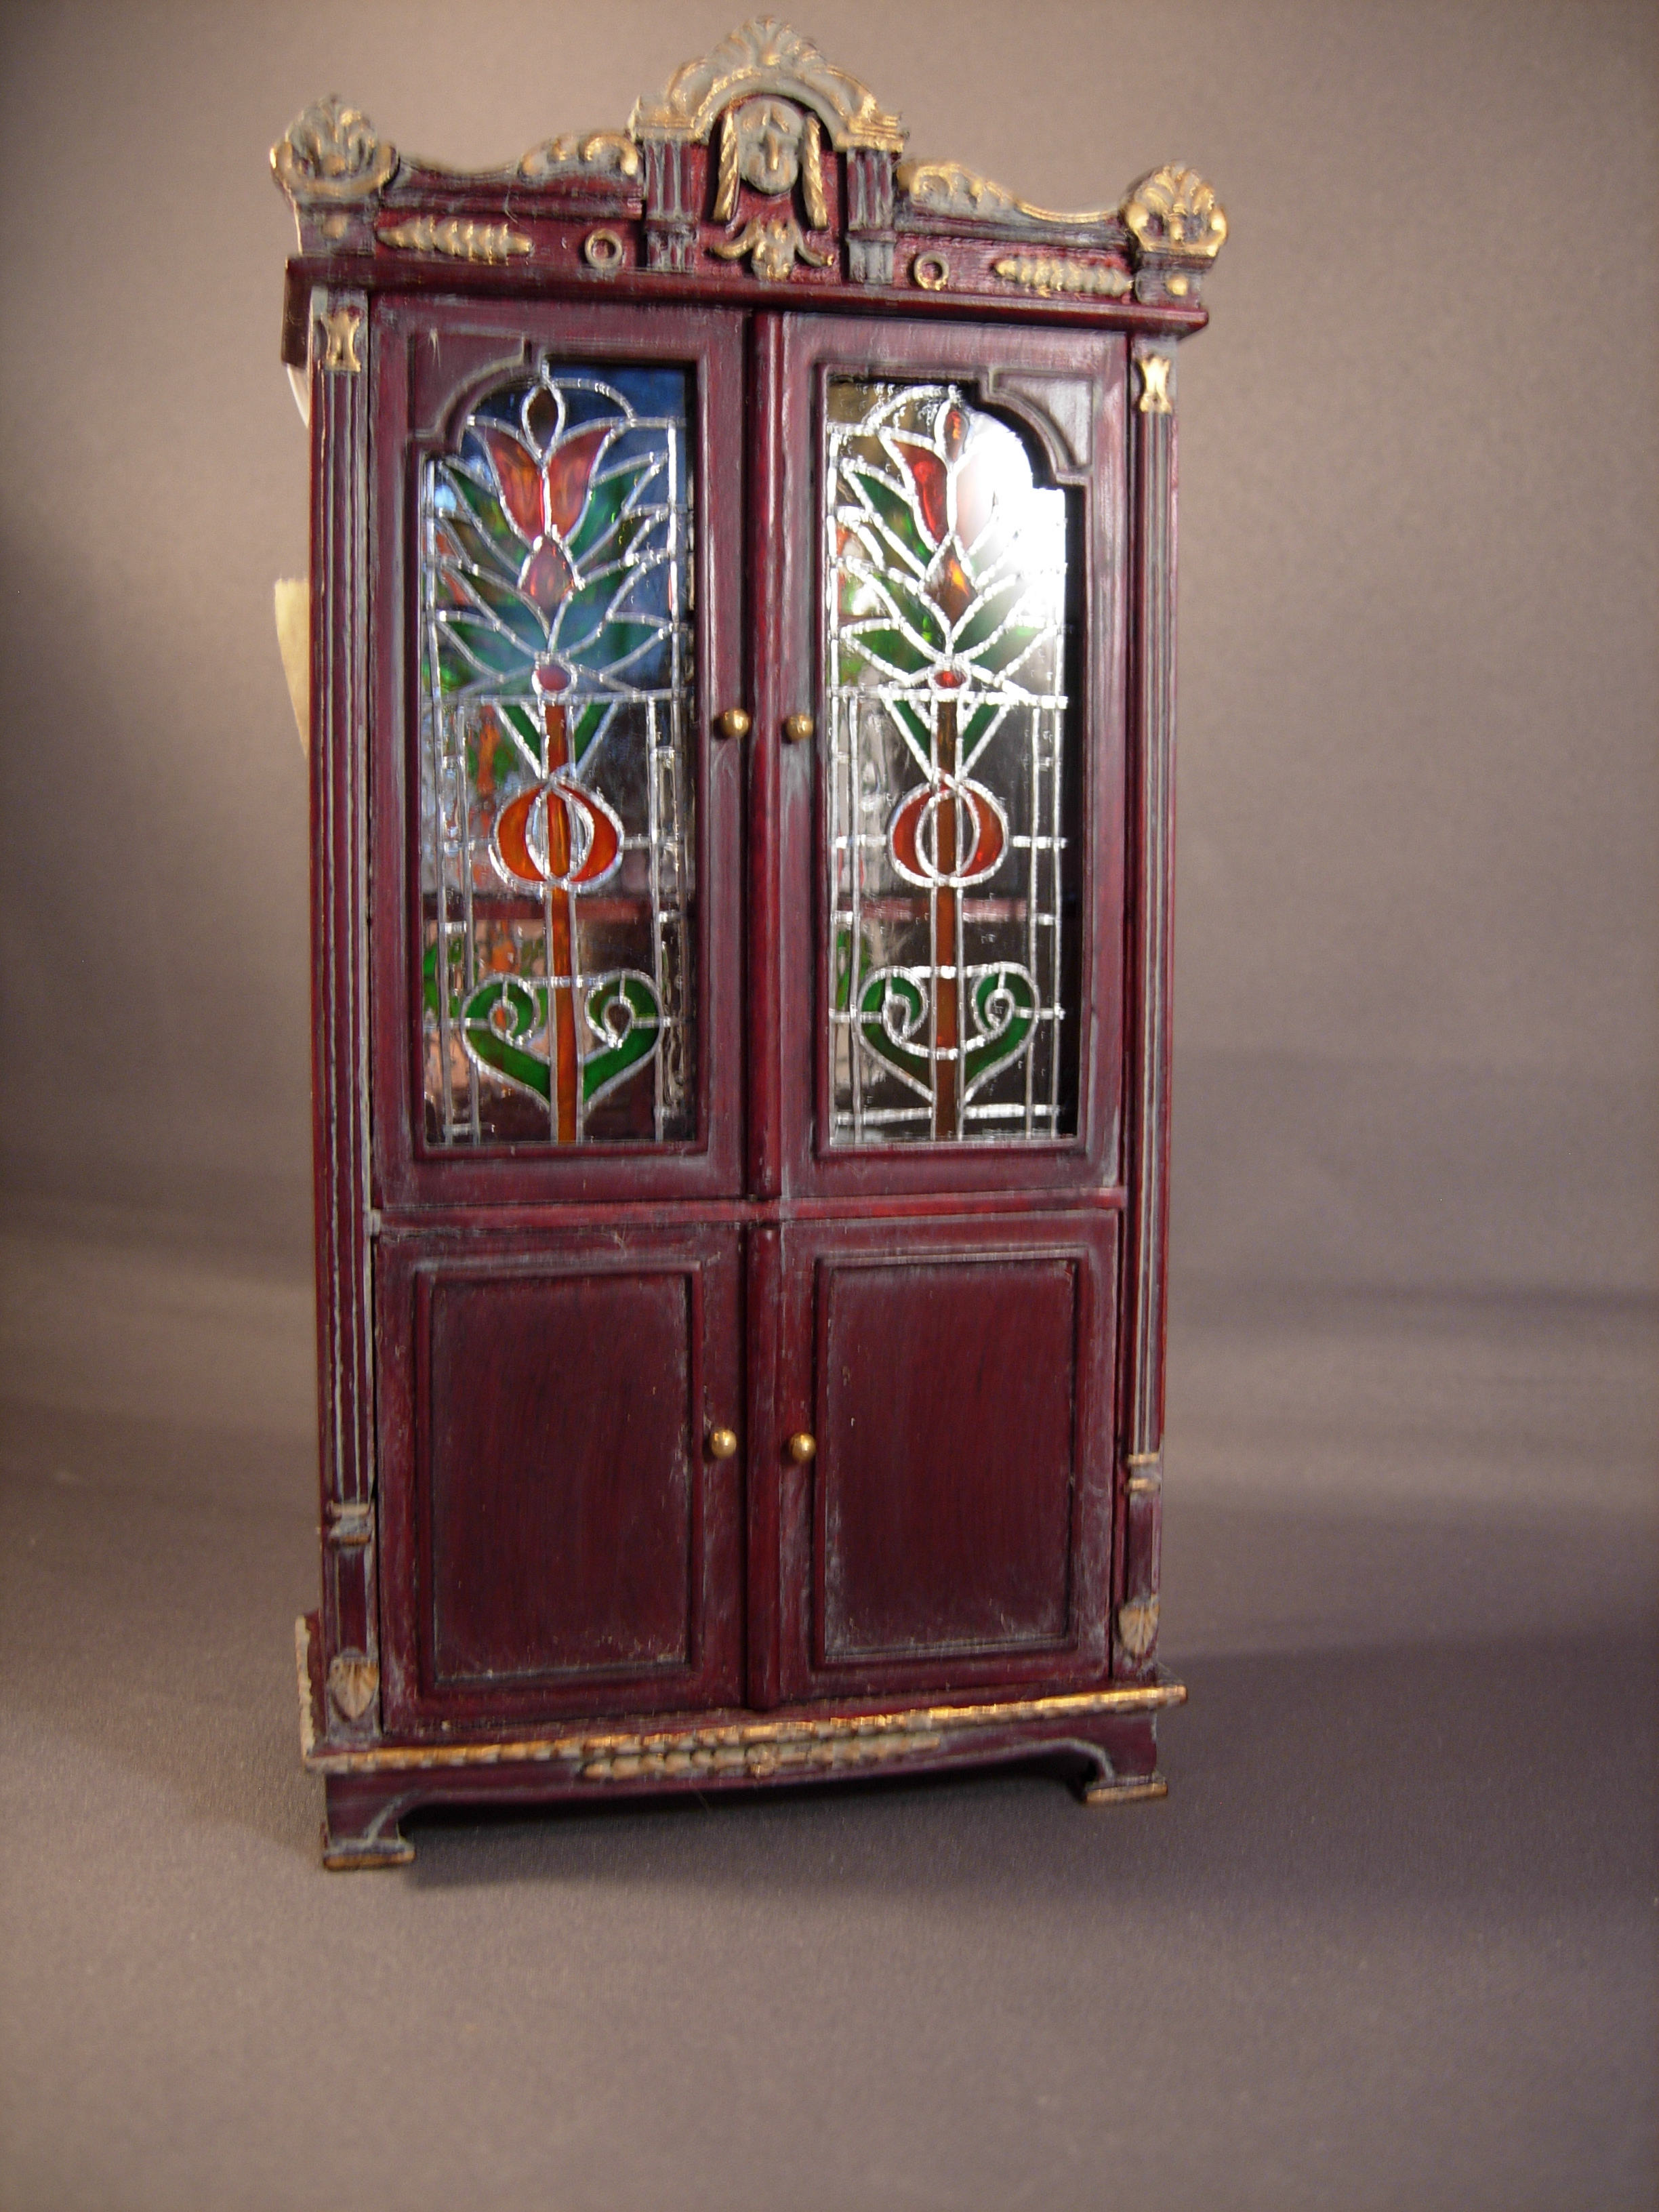 stained glass furniture design photo - 8